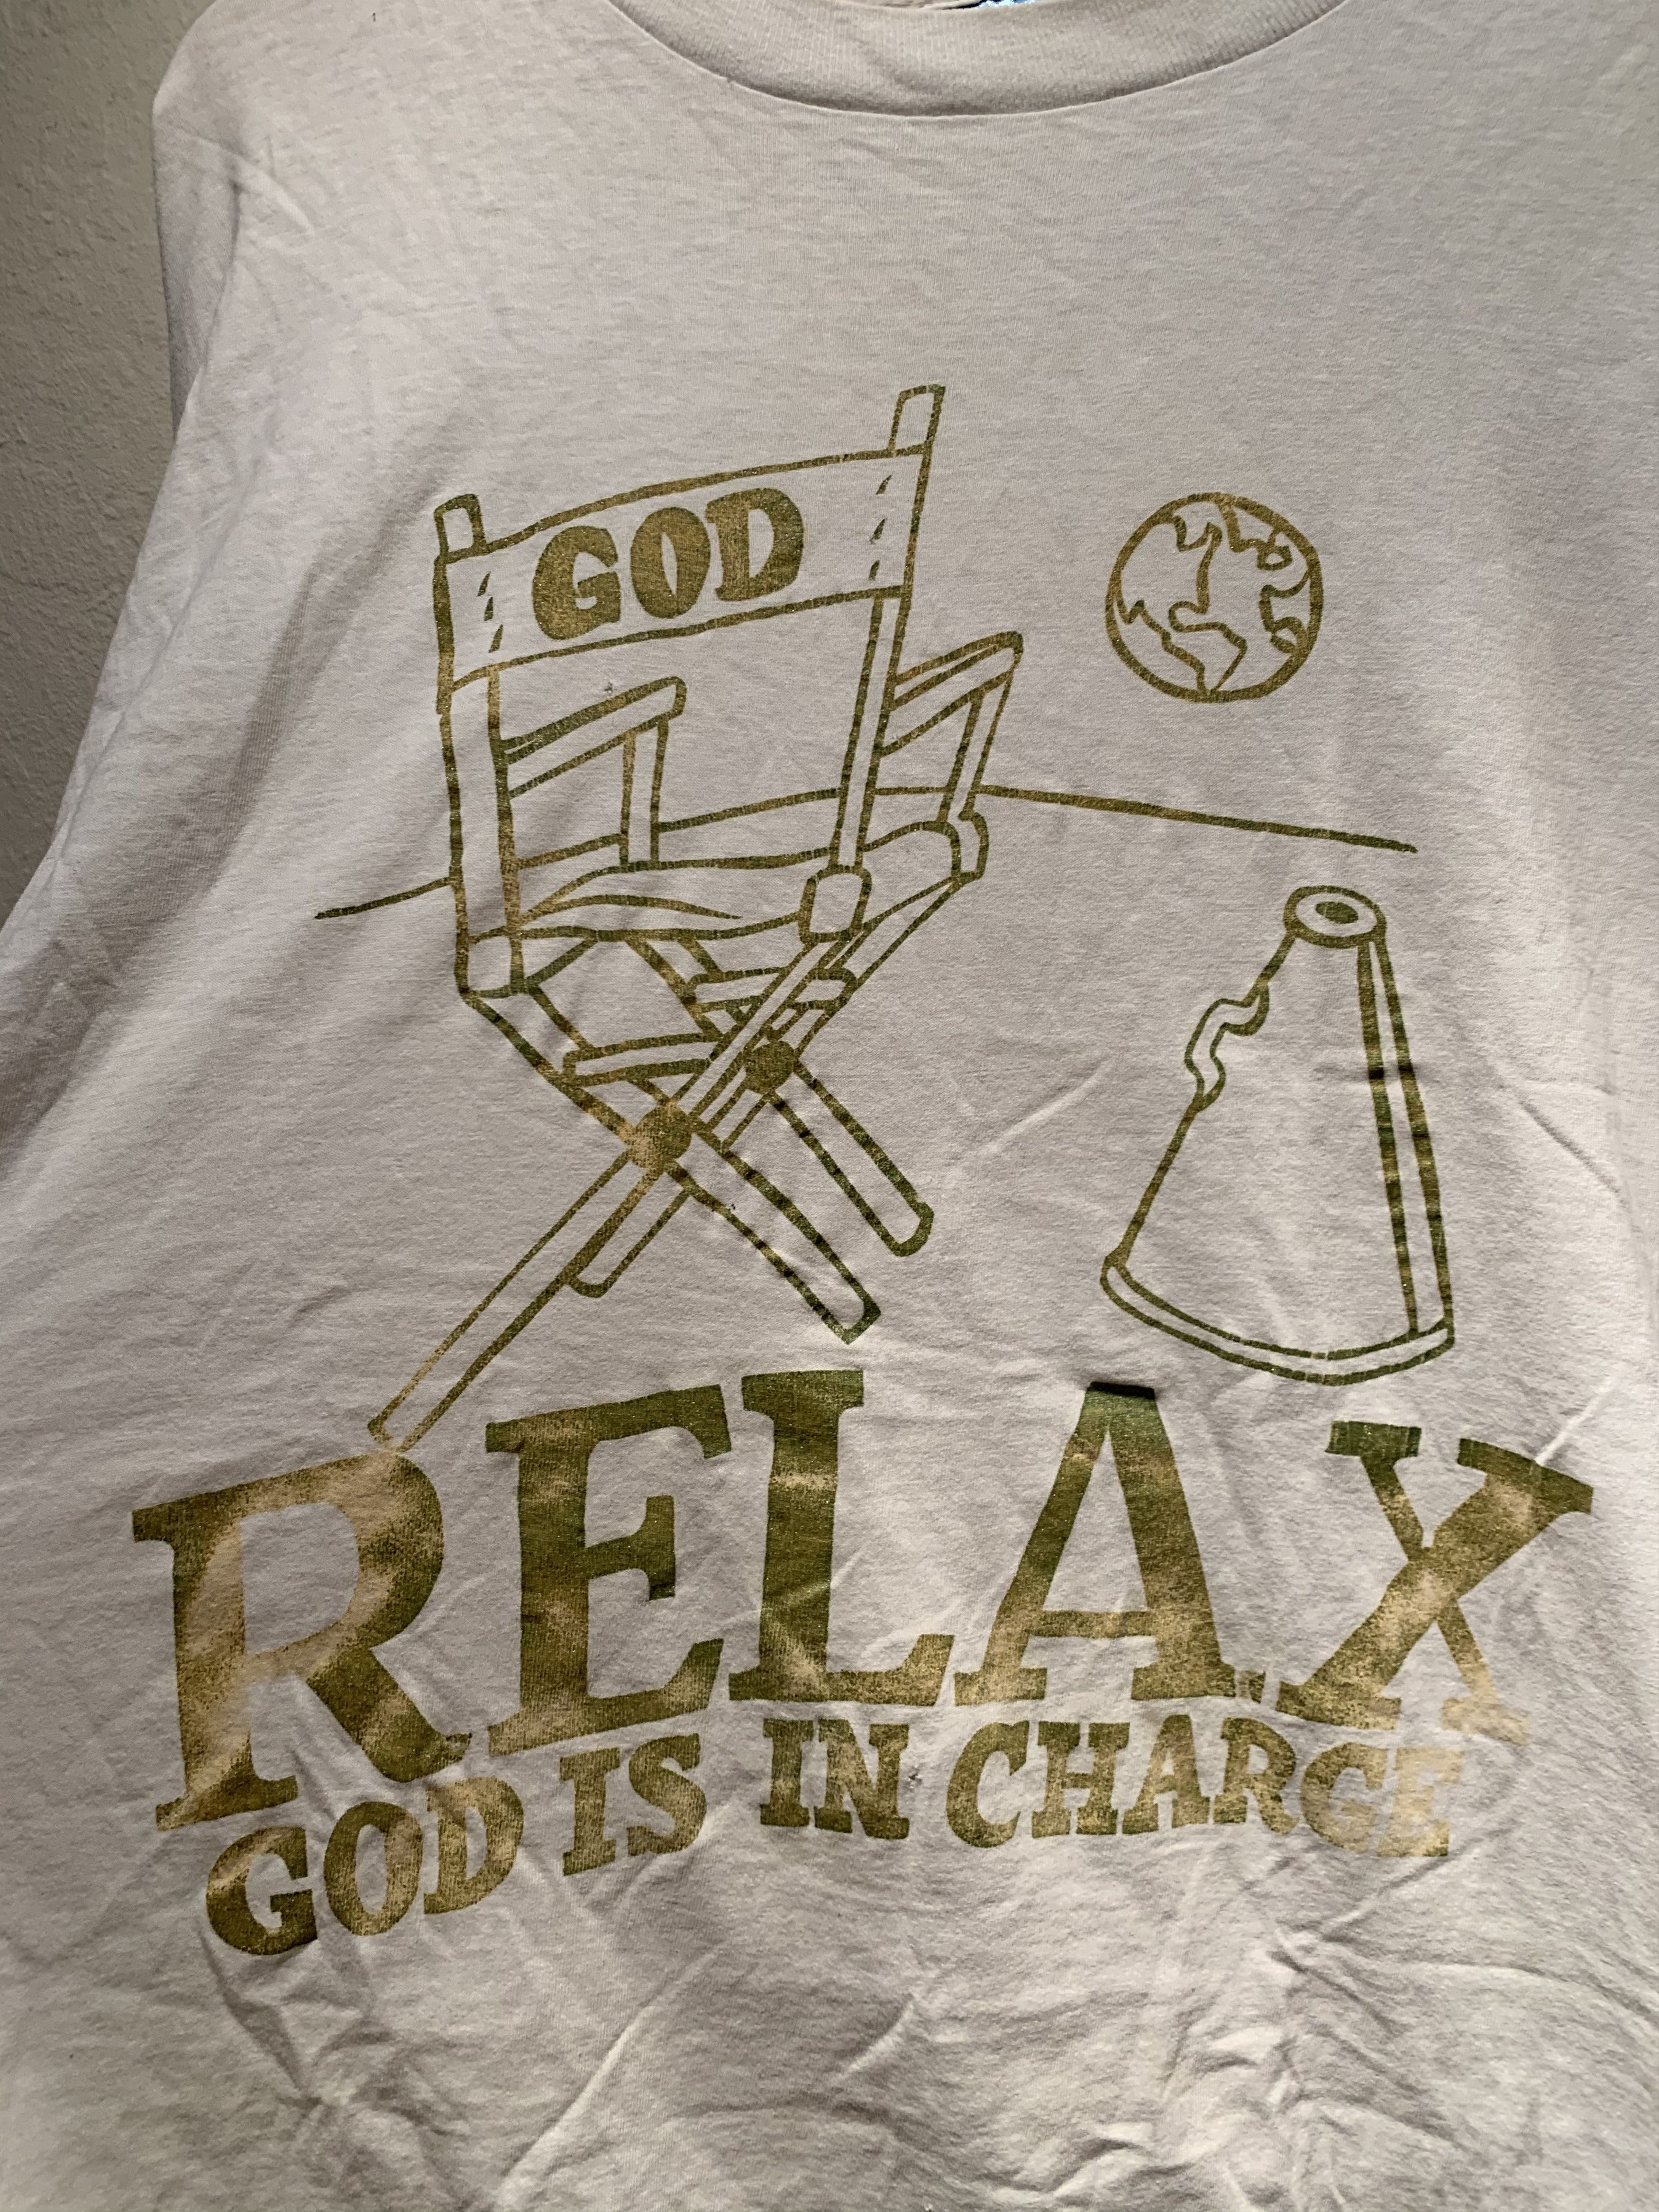 Vintage *RARE* Vintage God Is In Charge Directors Chair T-Shirt Size US XL / EU 56 / 4 - 2 Preview